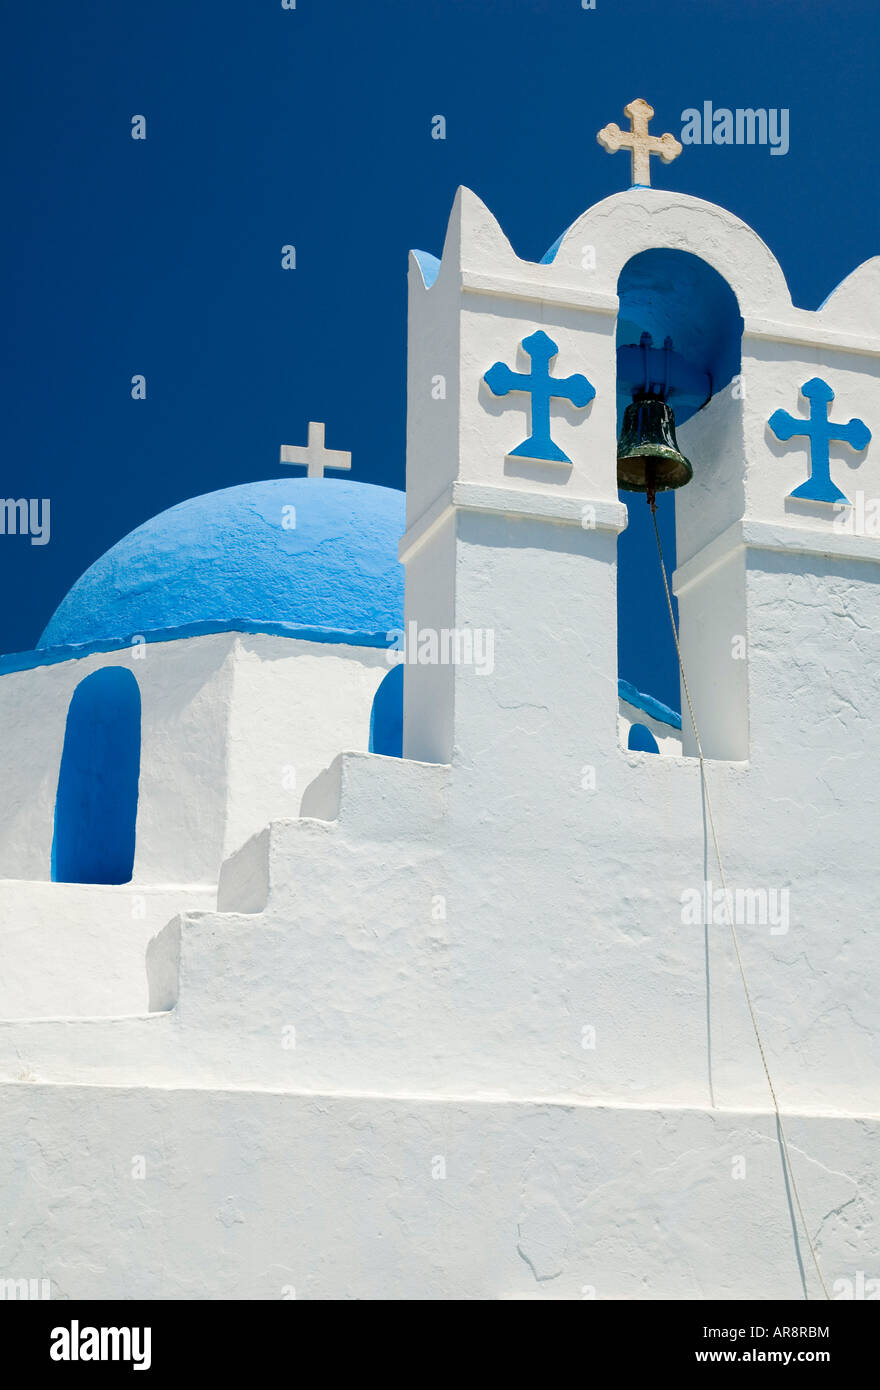 A traditional Greek scene of a blue and white Orthodox Church and bell tower in Parikia on the island of Paros, Greece Stock Photo